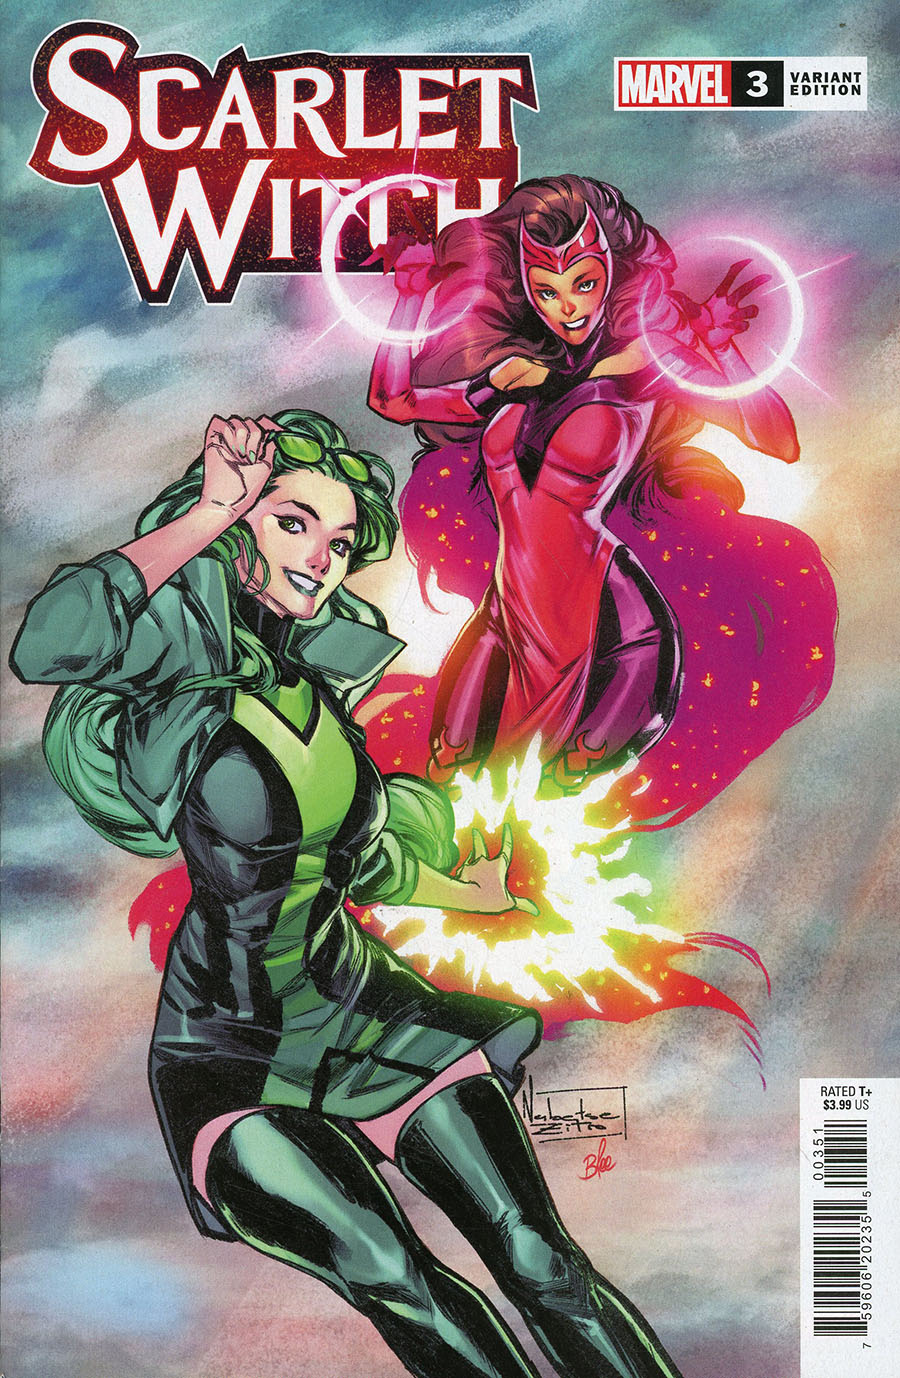 Scarlet Witch Vol 3 #3 Cover E Incentive Nabetse Zitro Variant Cover